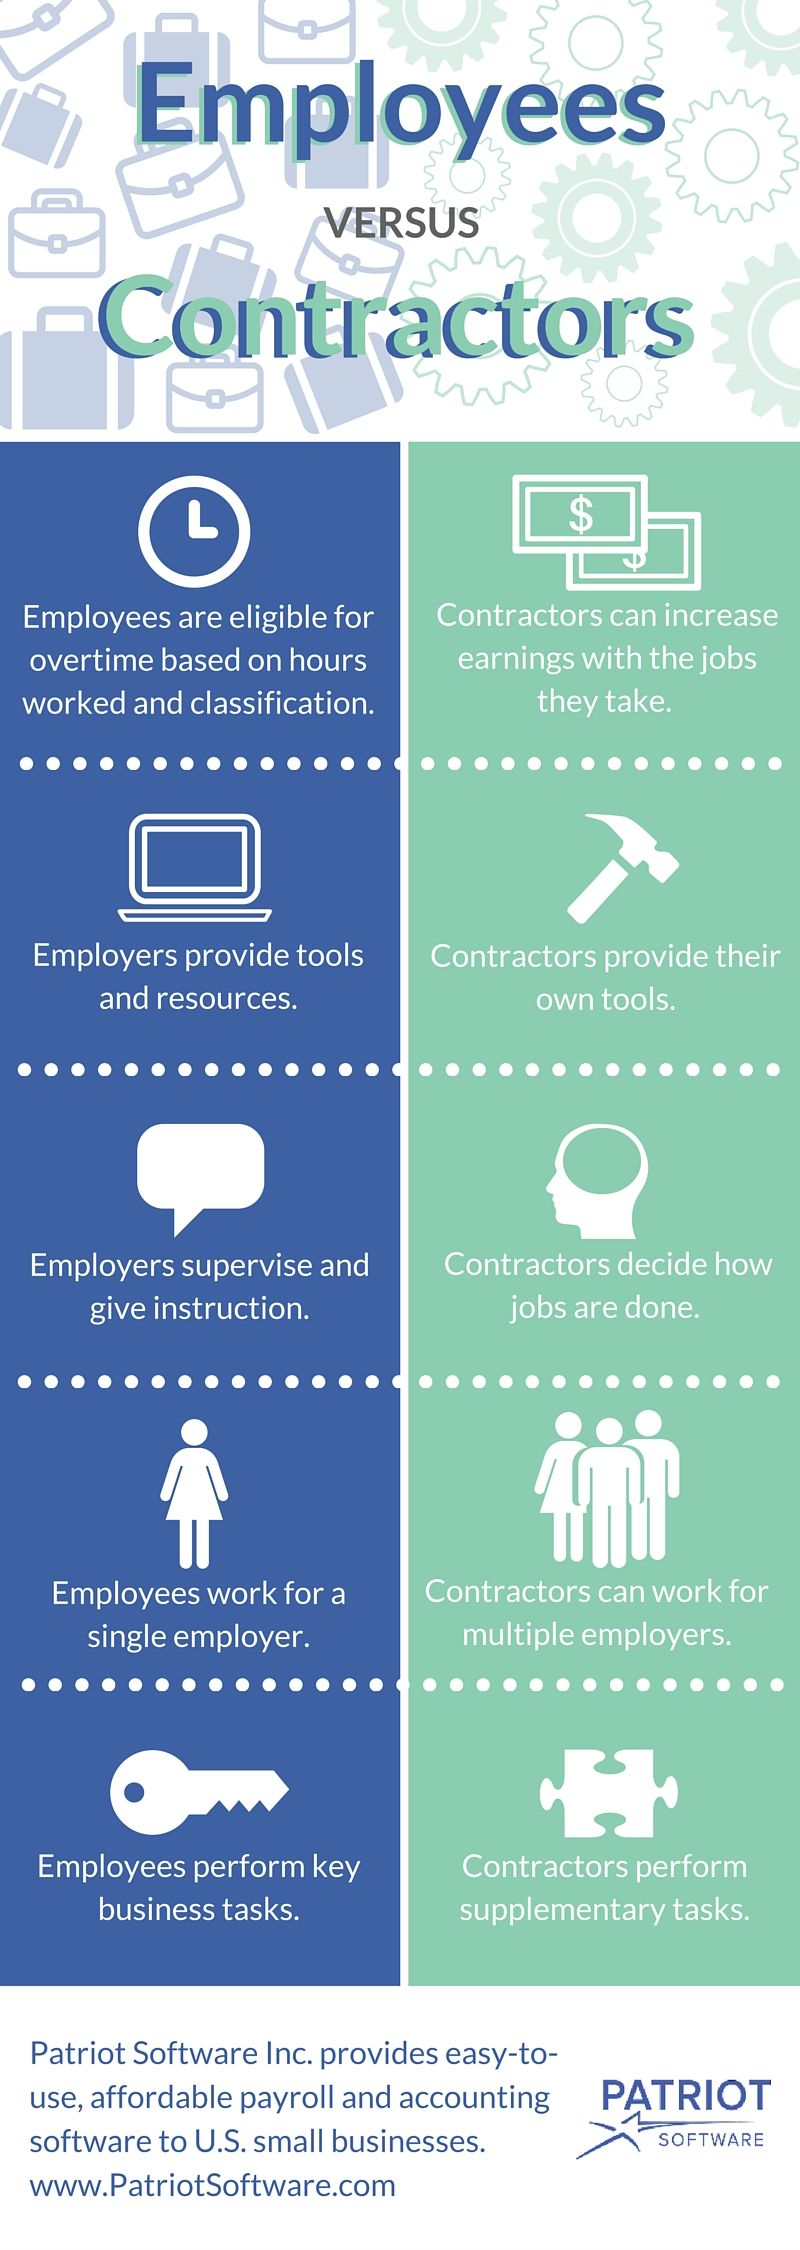 Independent contractor vs. employee checklist infographic from Patriot Software.